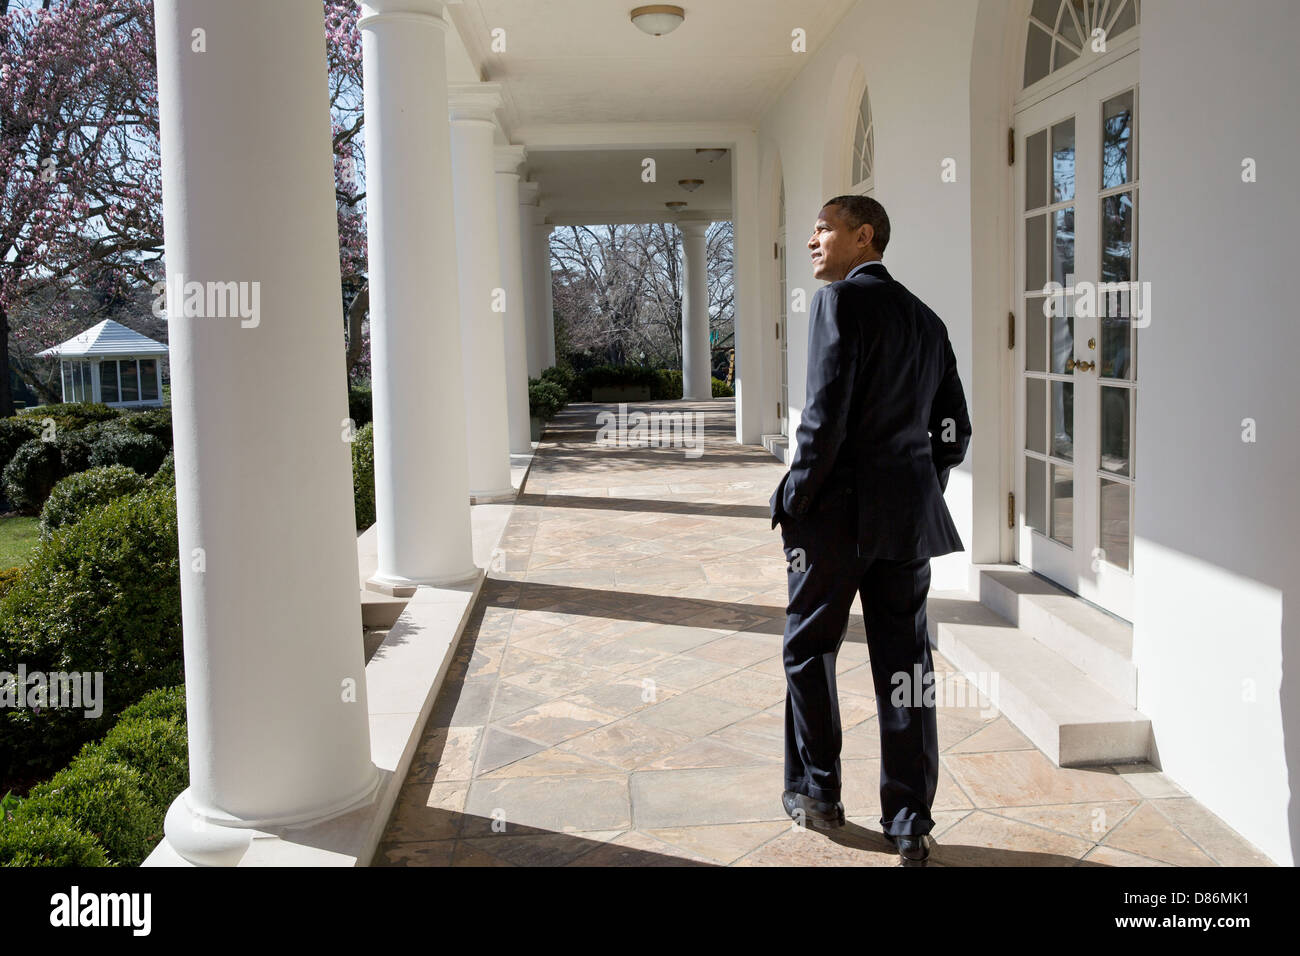 US President Barack Obama looks out over the Rose Garden as he walks along the Colonnade of the White House April 2, 2013 in Washington, DC. Stock Photo